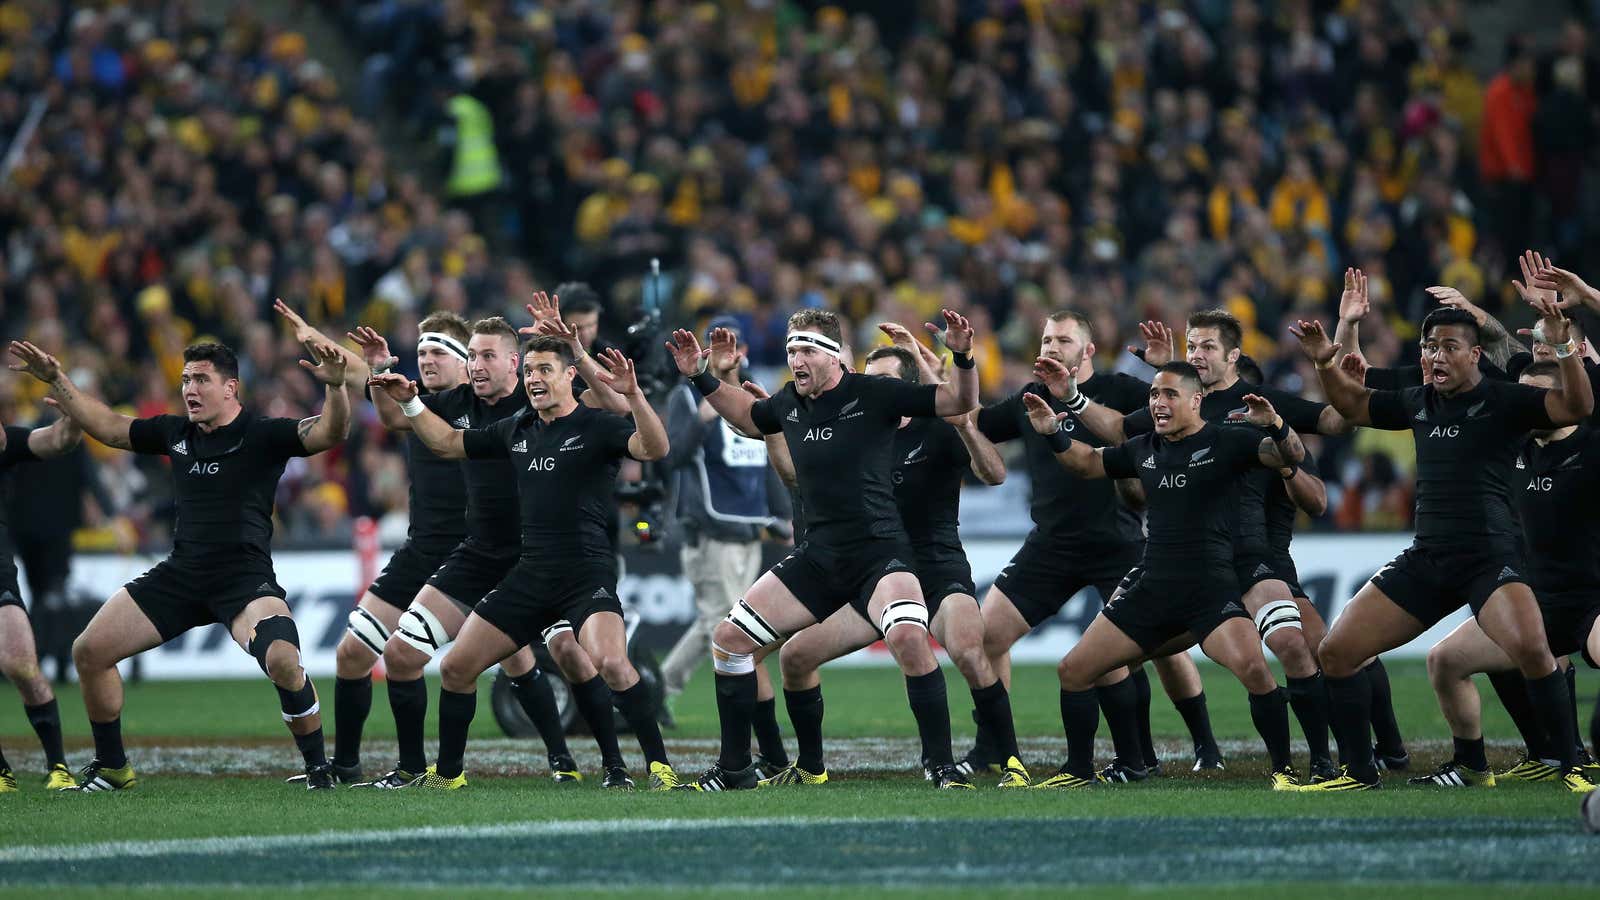 The All Blacks perform the haka before the start of the 2015 Rugby World Cup Pool C match between Argentina and New Zealand in London.